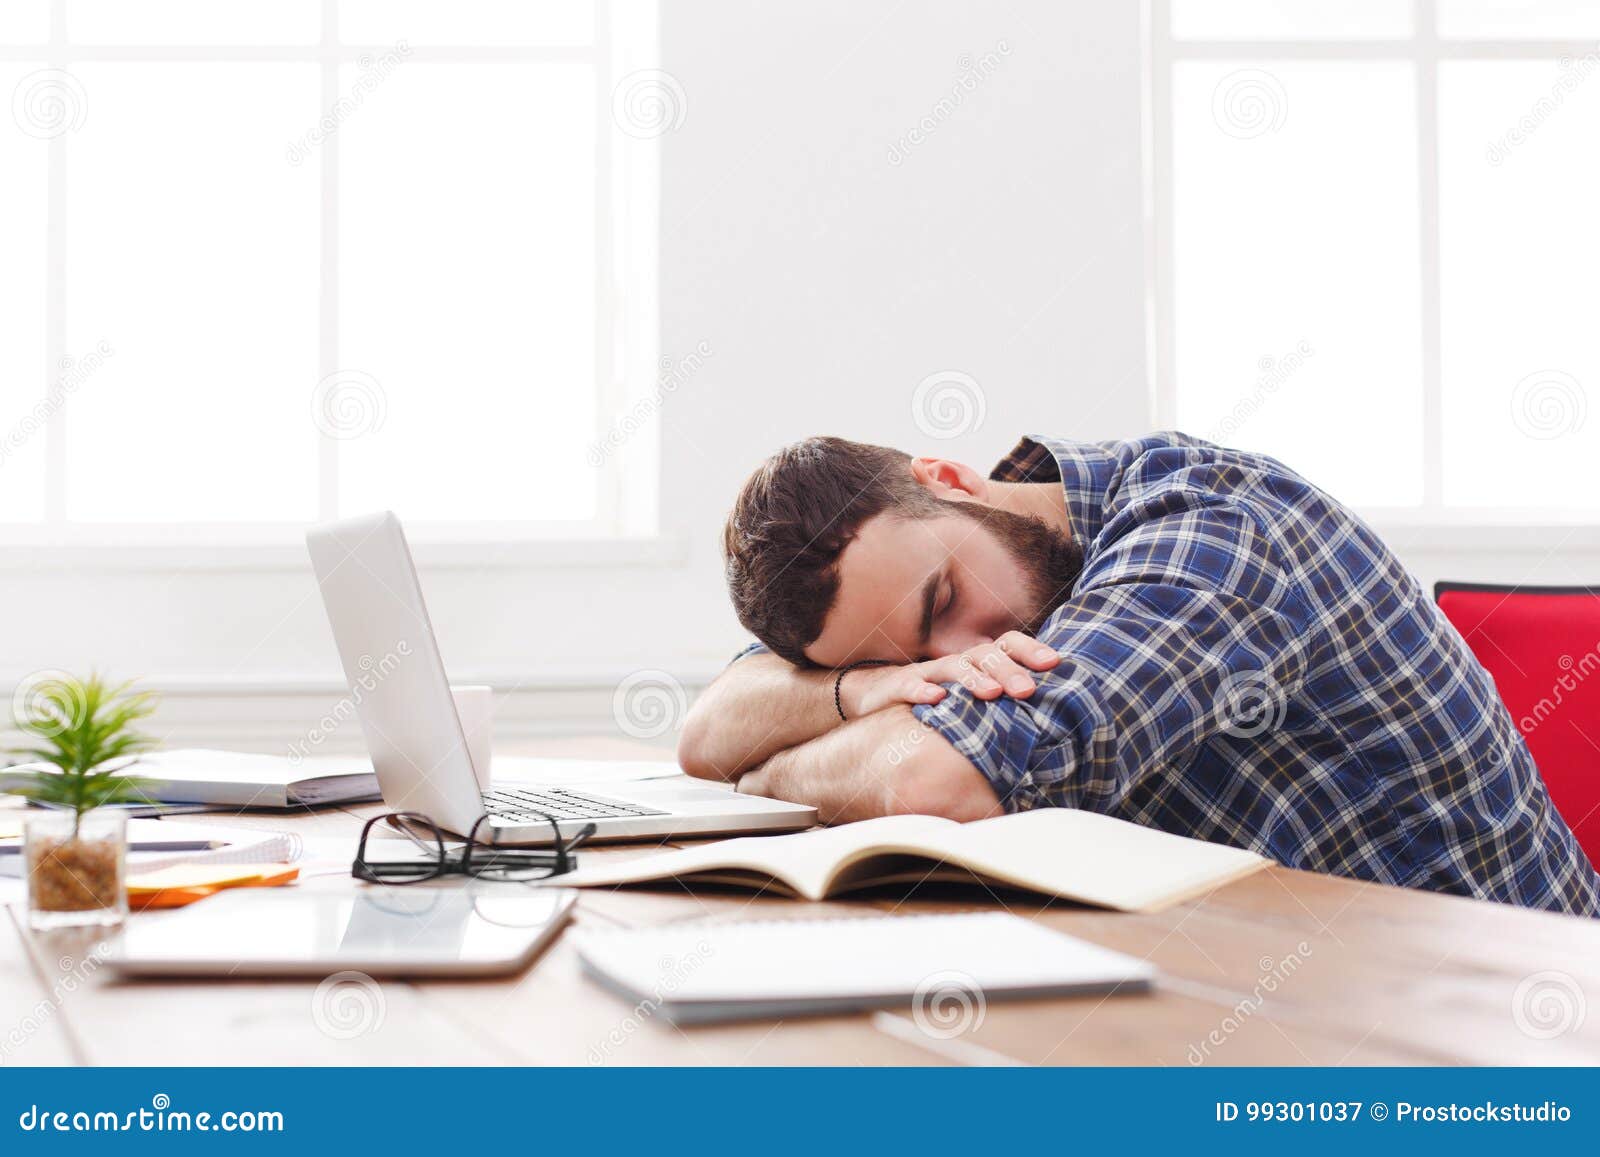 World window Sentimental Becks Overworked Exhausted Manager Sleeping on Table after Working Day Stock  Image - Image of problem, concept: 99301037